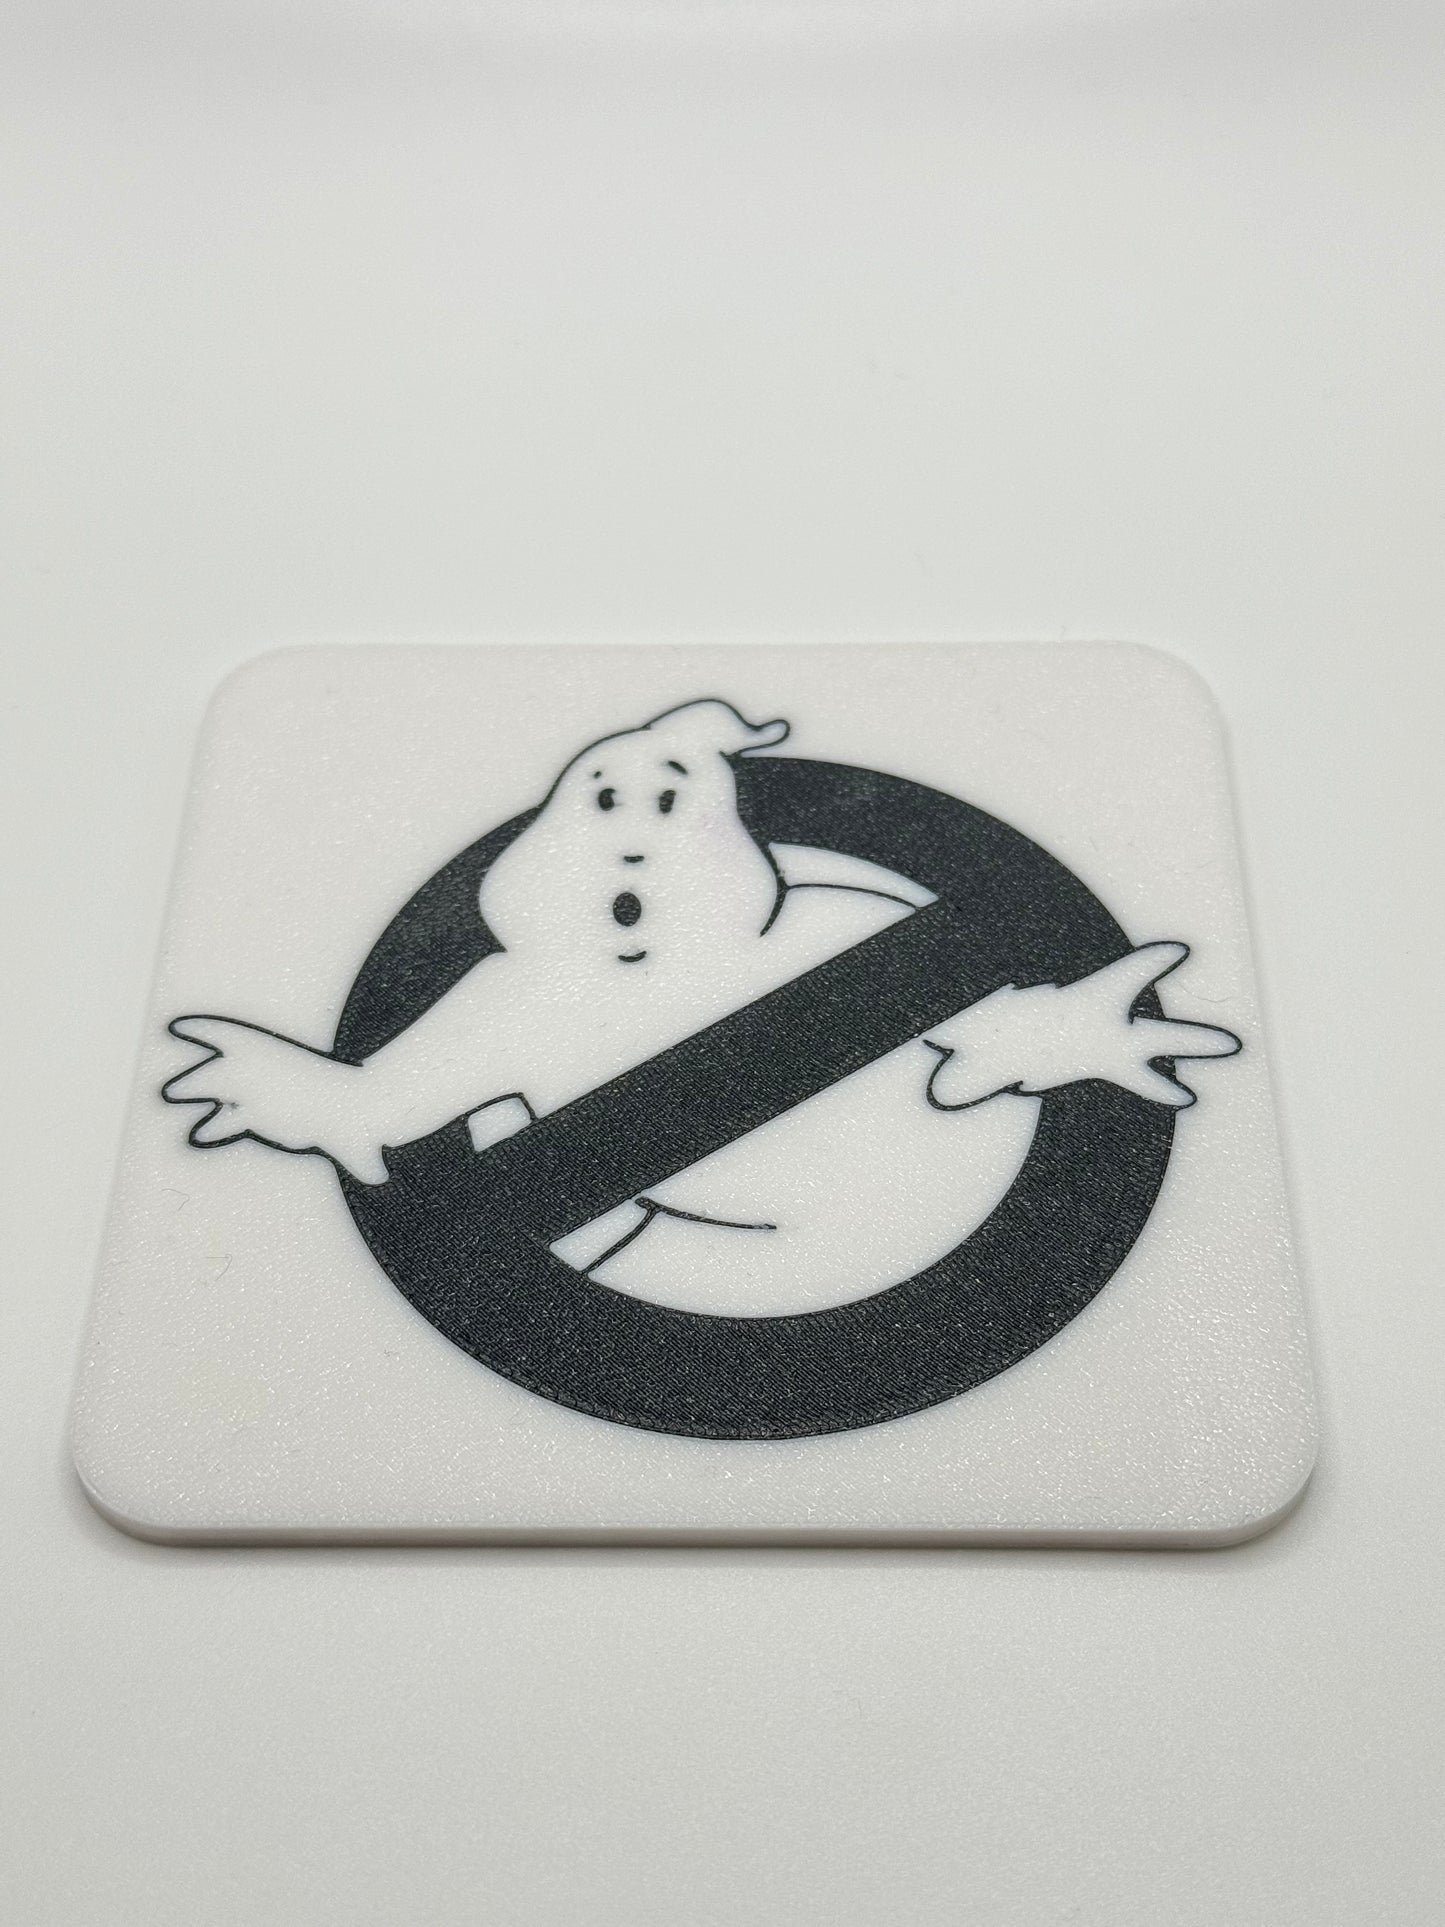 Ghostbusters Coaster